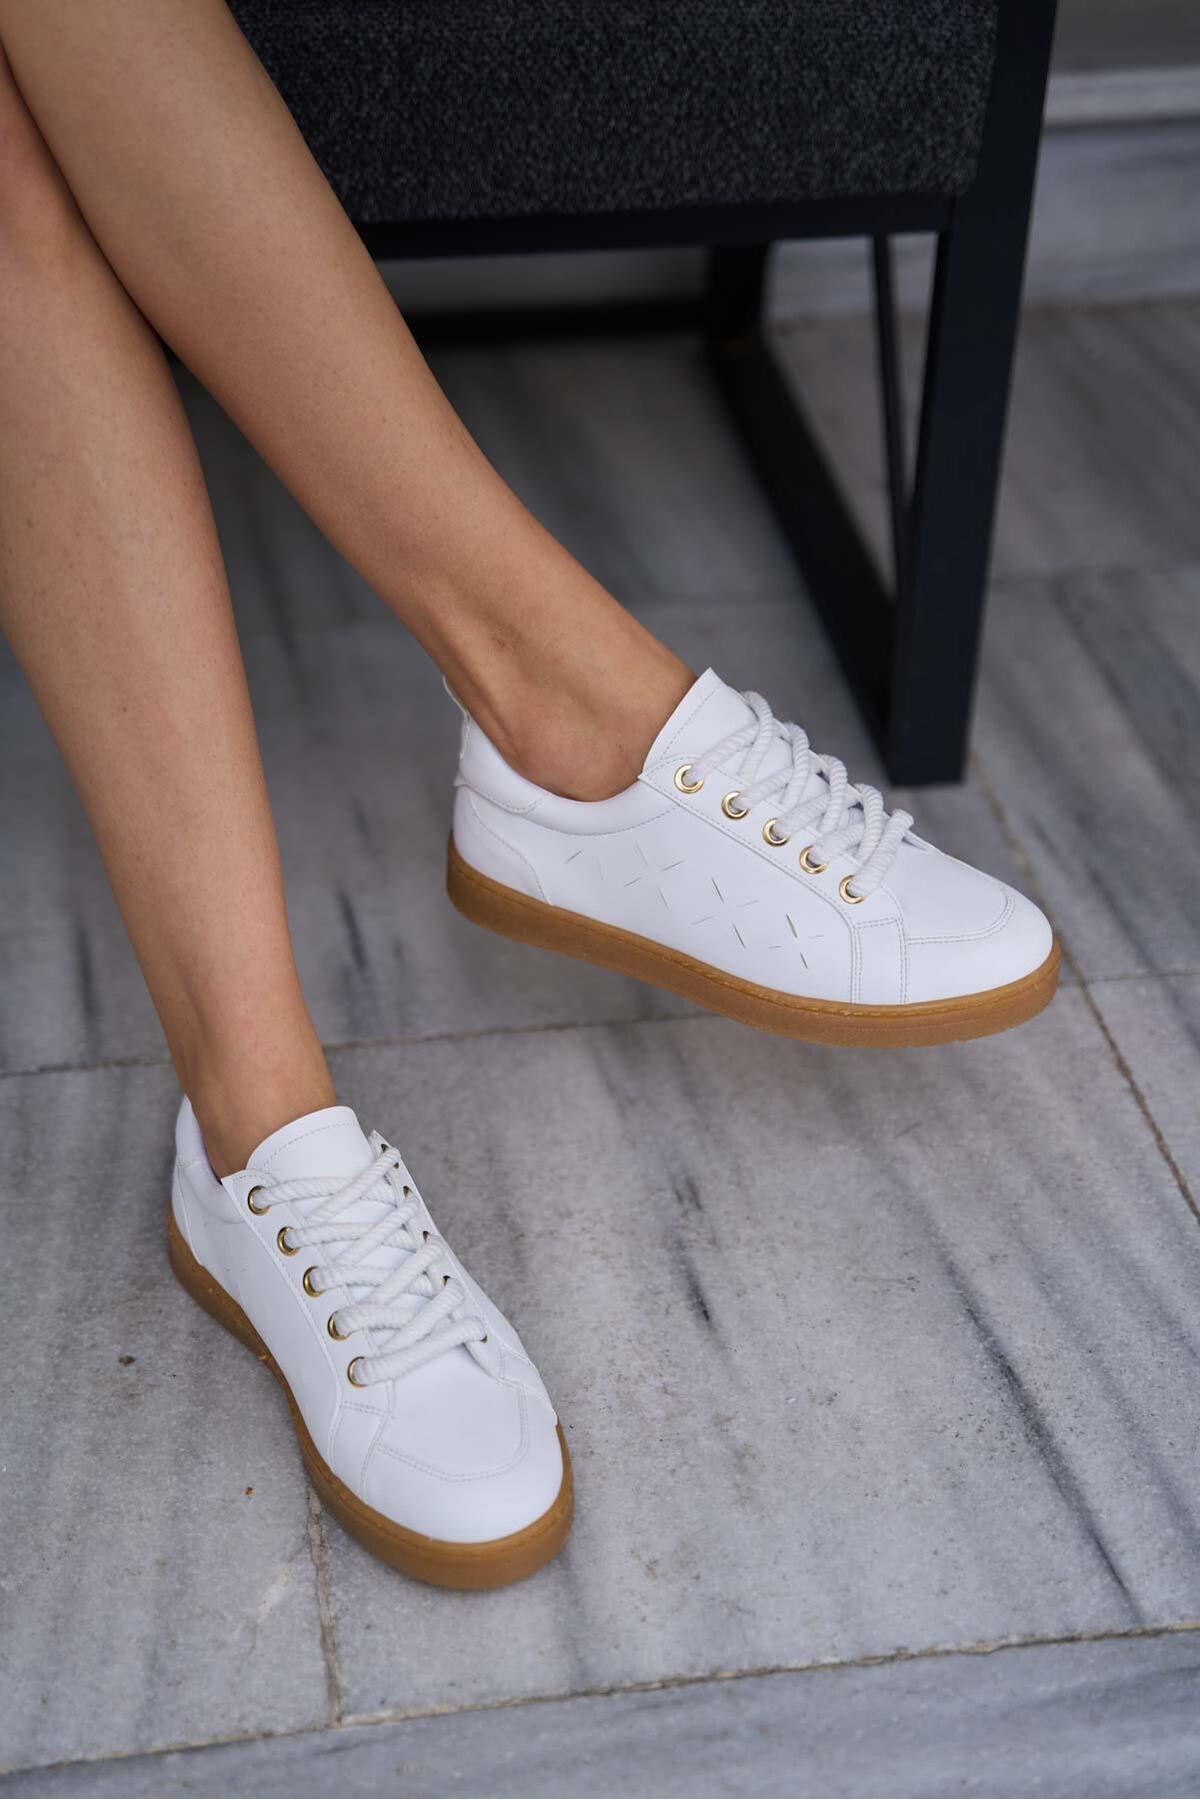 Madamra White Women's Thick Laced Leather Look Sneakers Sneaker